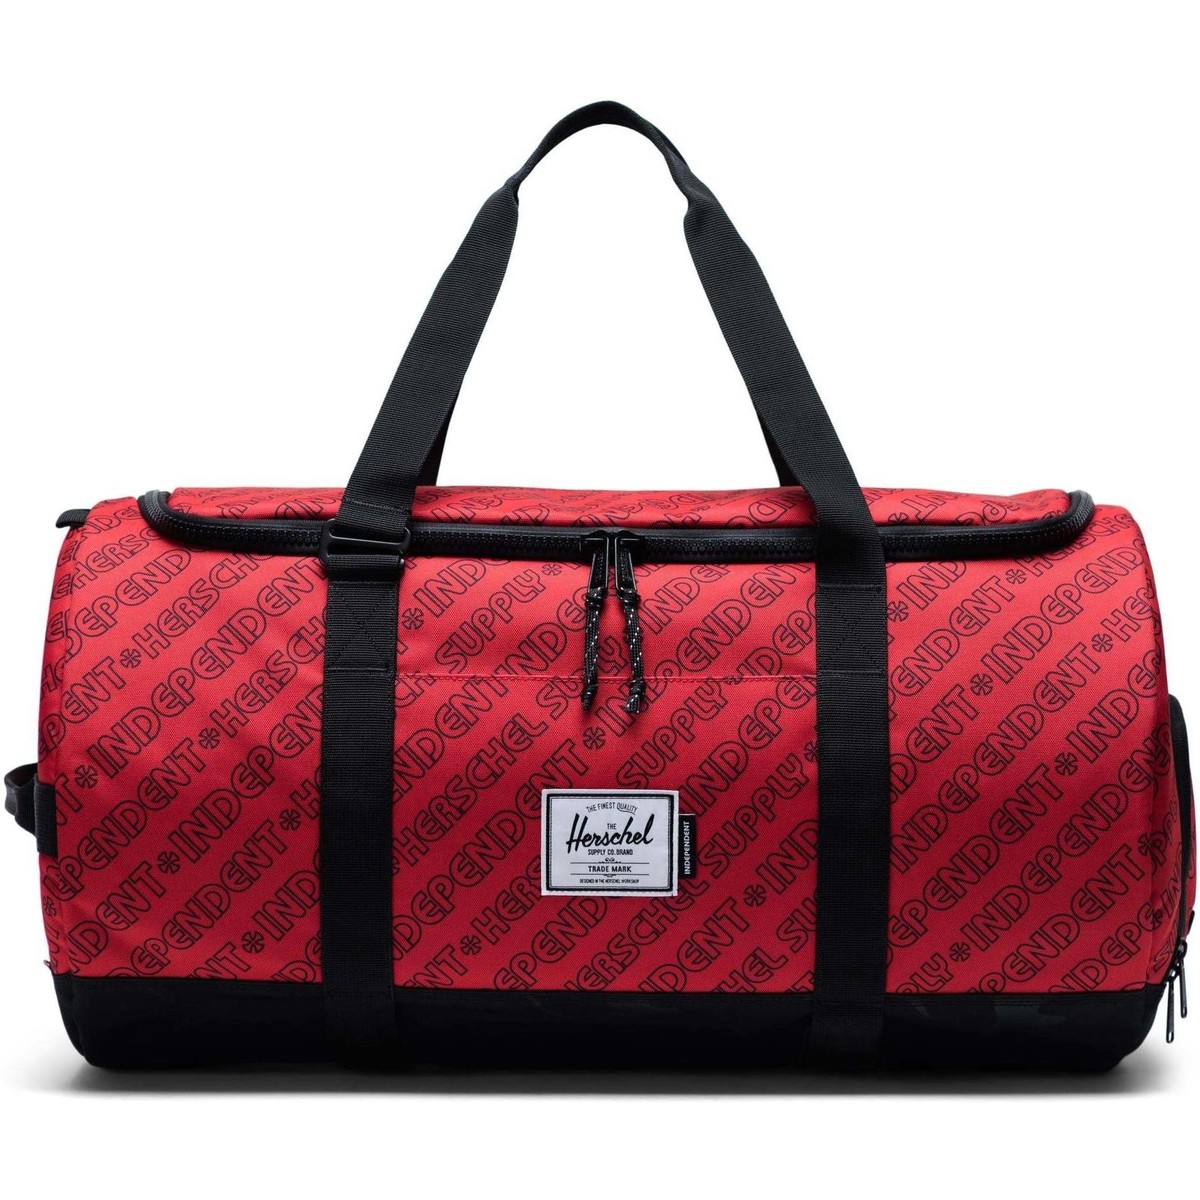 Herschel Rouge Sutton Carryall Independent Unified Red/Black Camo pGtGlC52